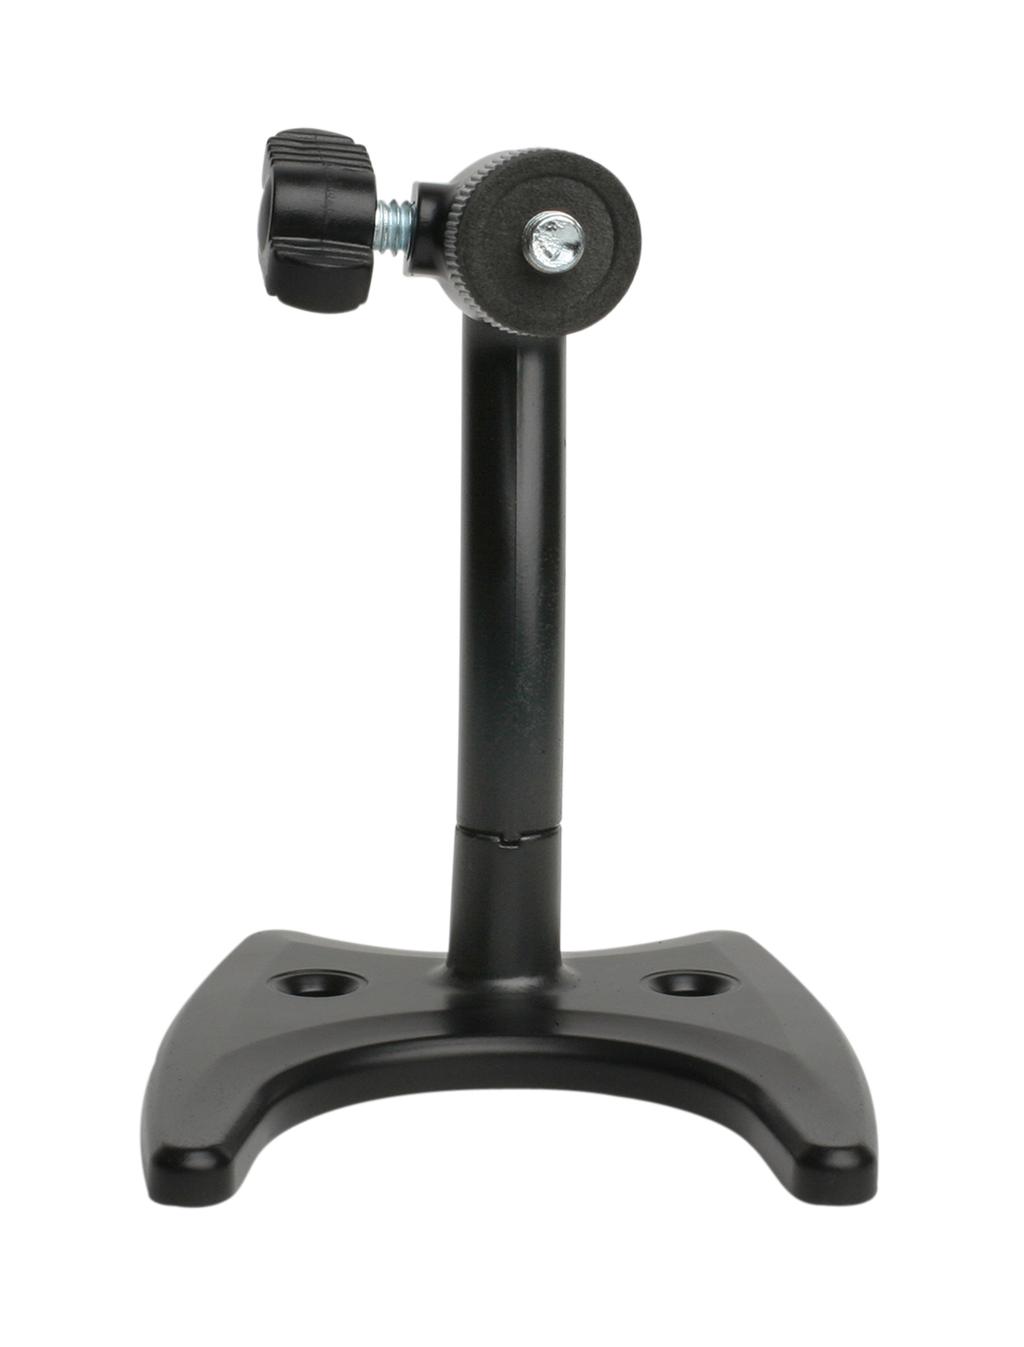 back panel socket cavity. Attach the camera stand to the Internet Camera and station it for your application.